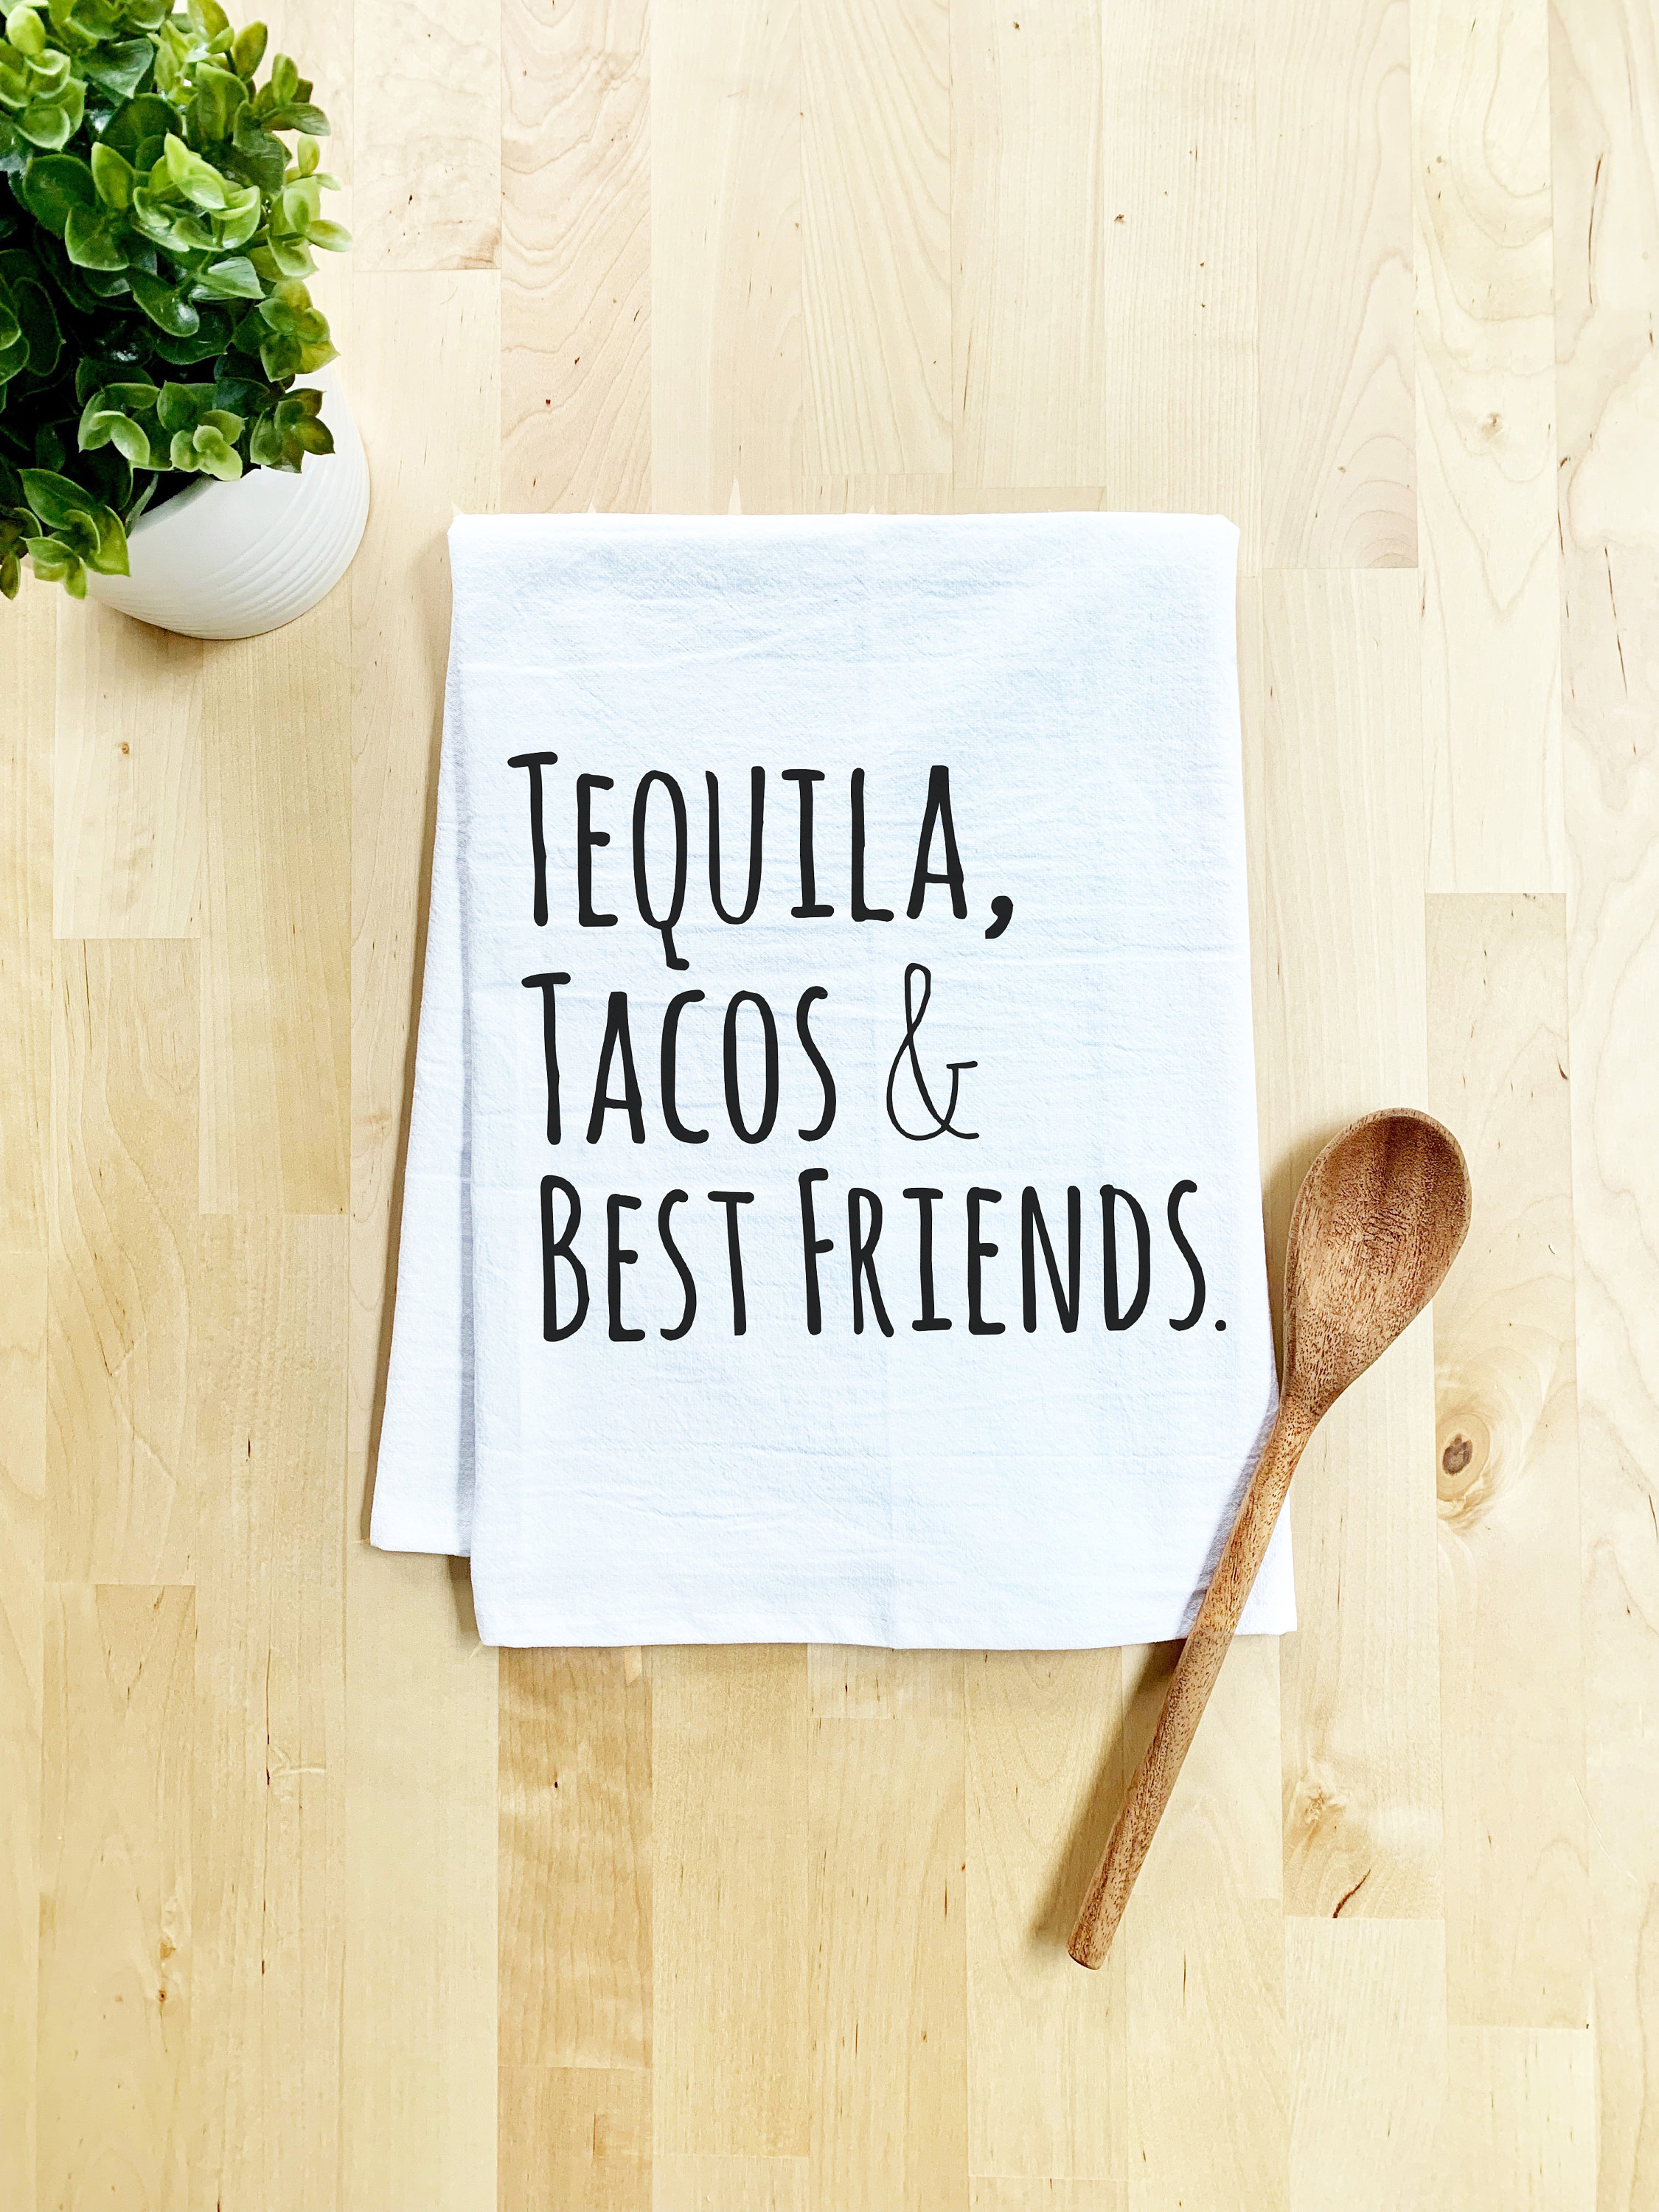 Adorable Screen-Printed Tequila-Inspired Dish Towel